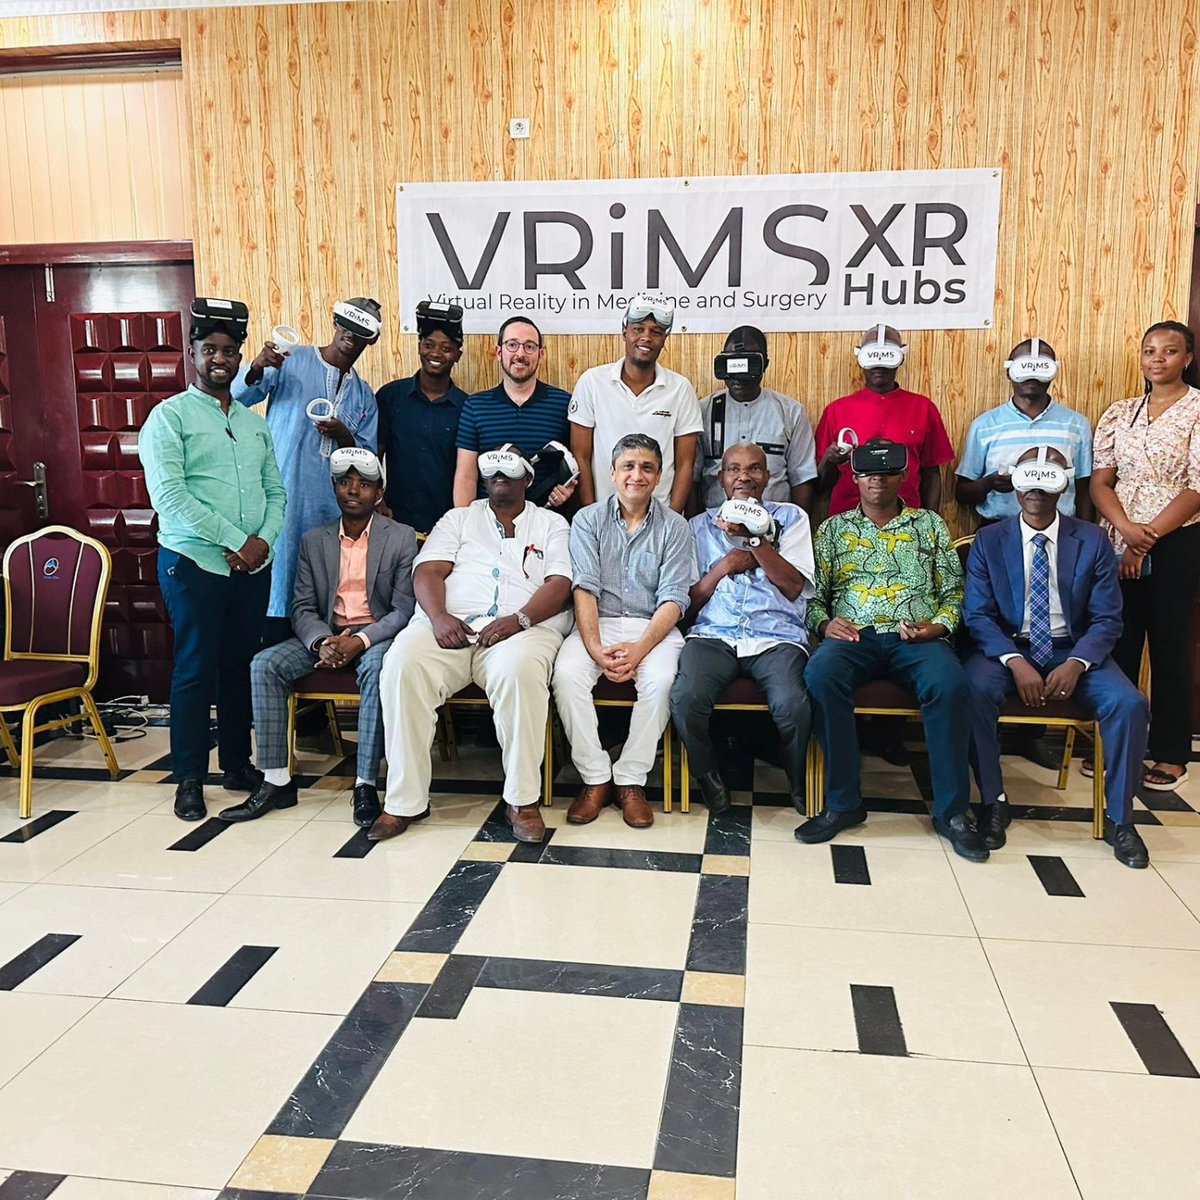 Setting up XR hubs across the world! This was in Burundi. A fantastic experience for all #vrims #vrmedicineandsurgery #extendedreality #vr #ar #xr #MedicalEducation